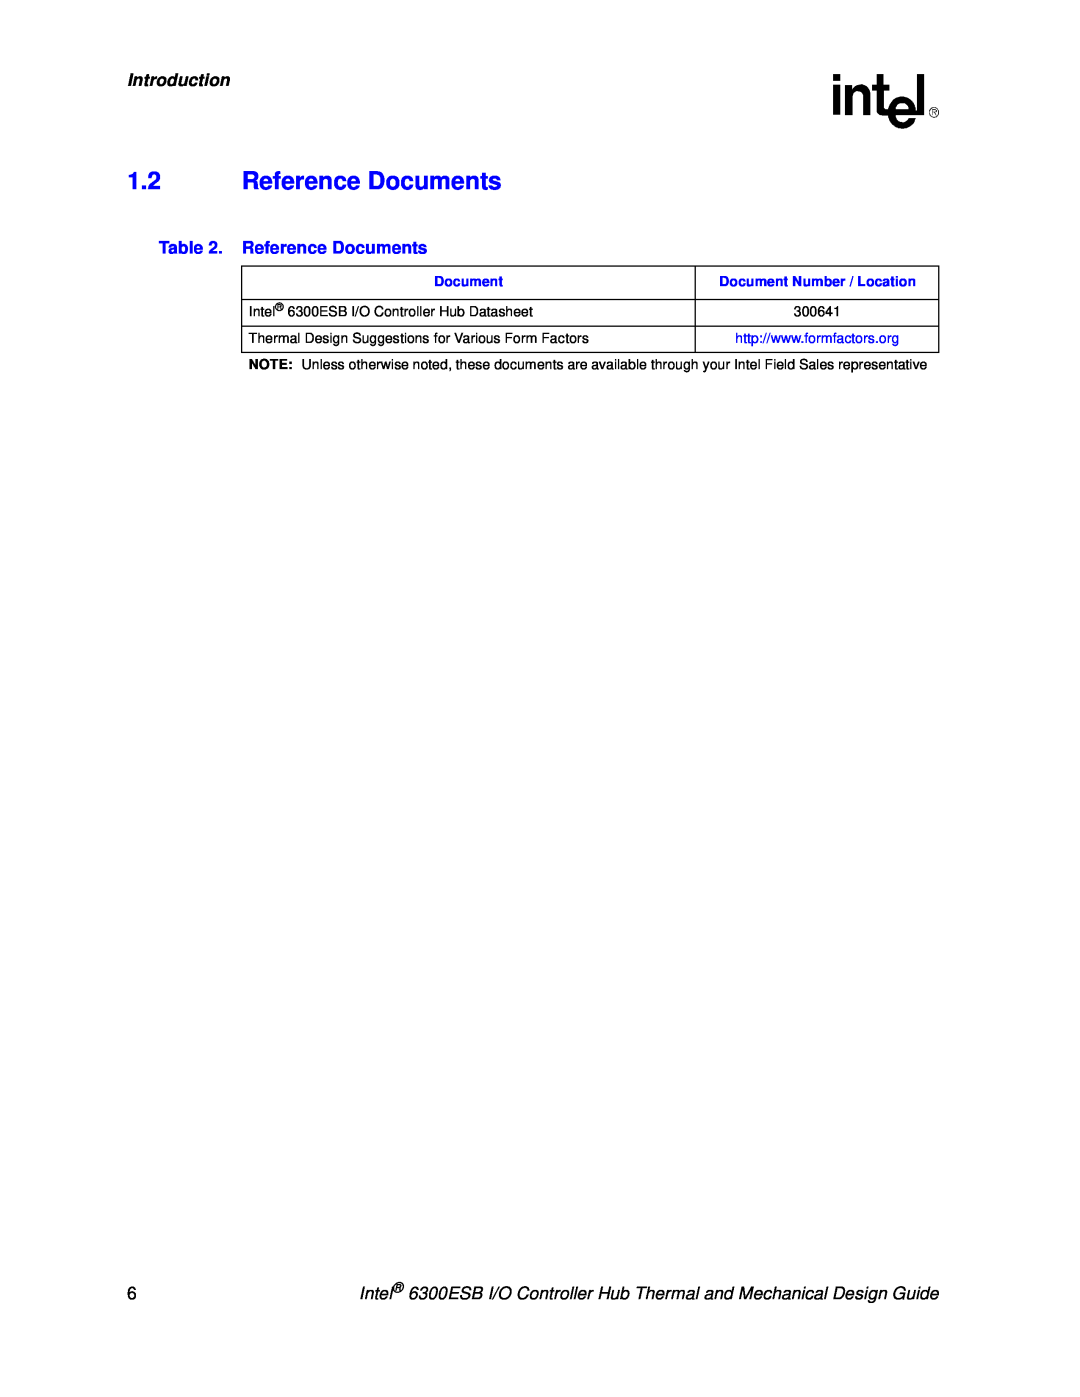 Intel 6300ESB manual Reference Documents, Introduction 